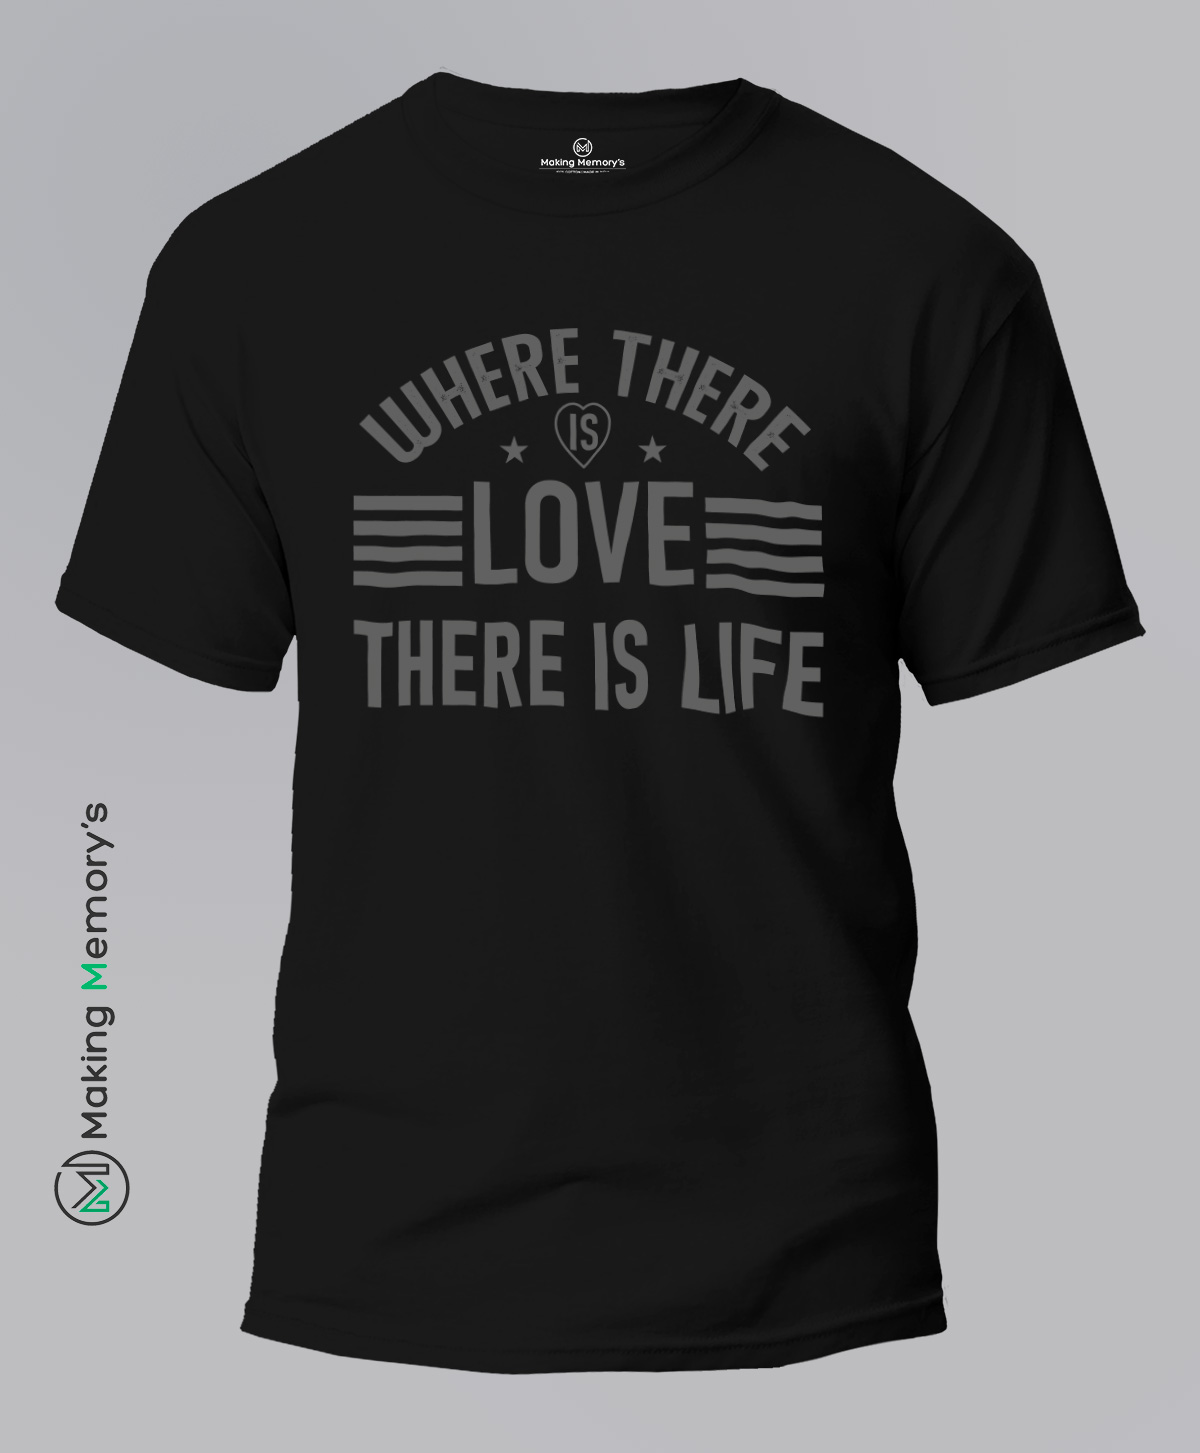 Where-There-Is-Love-There-Is-Life-Black-T-Shirt